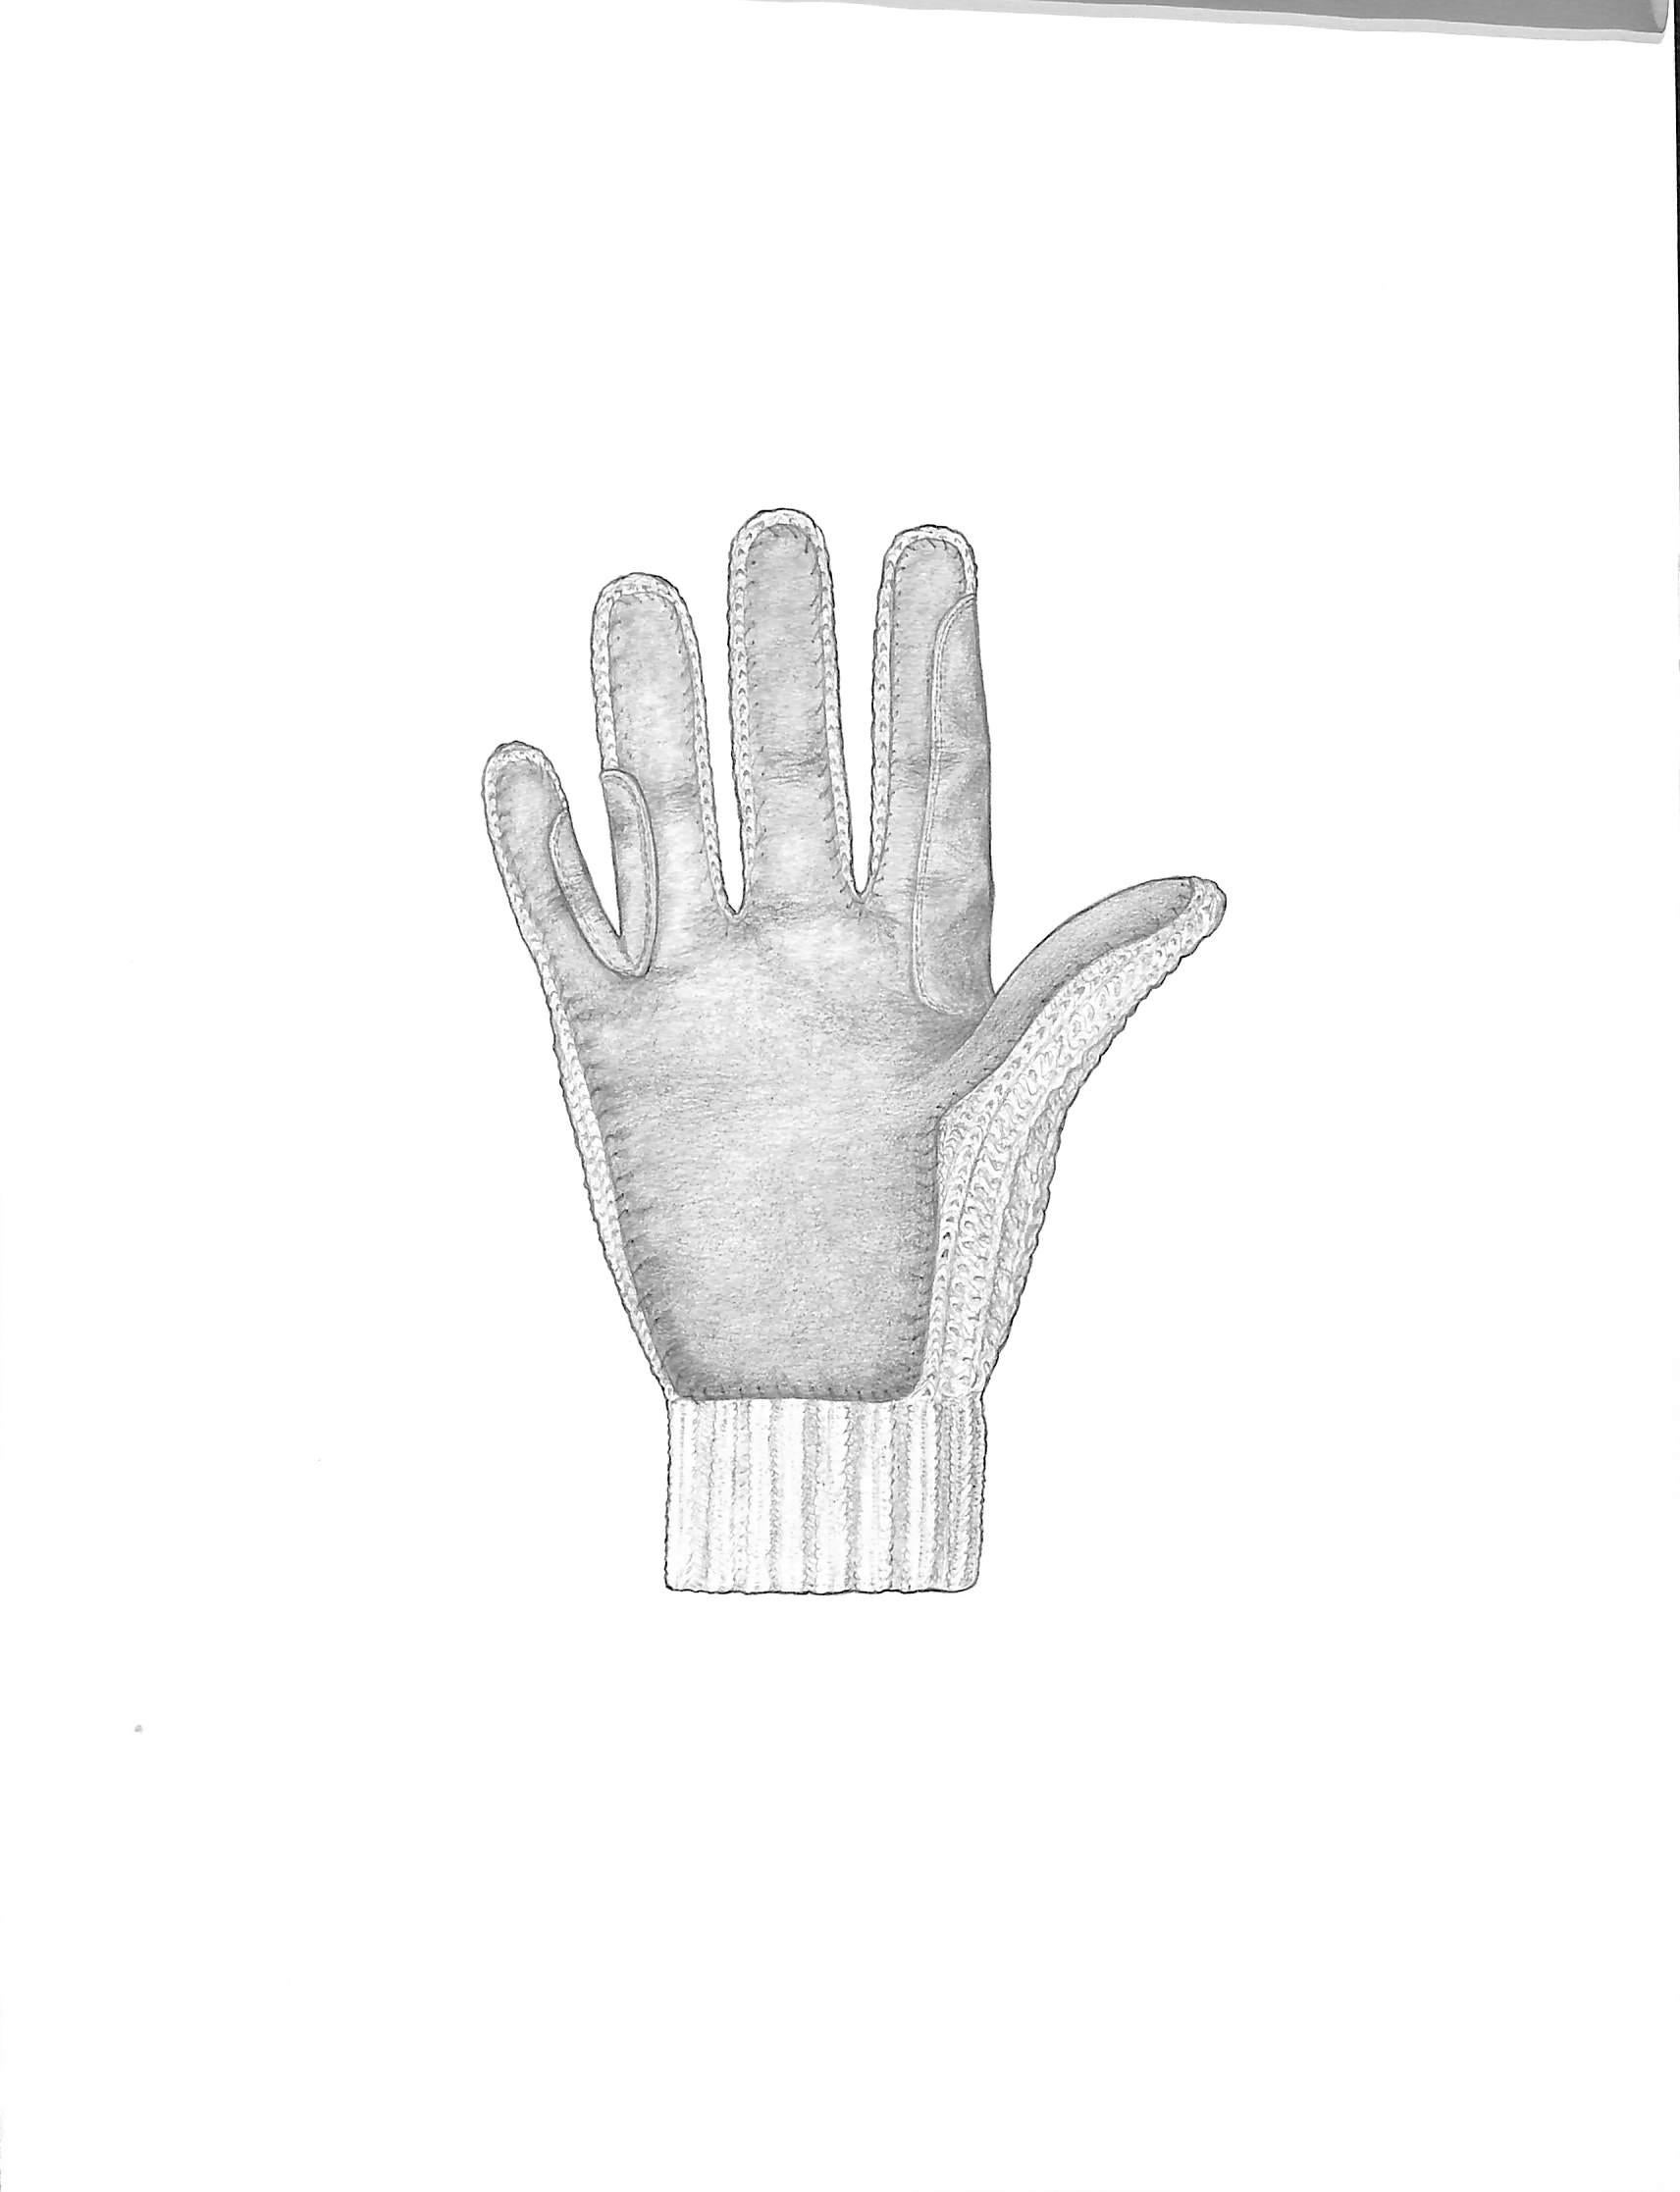 SSG Hunt Glove Graphite Drawing - Art by Unknown